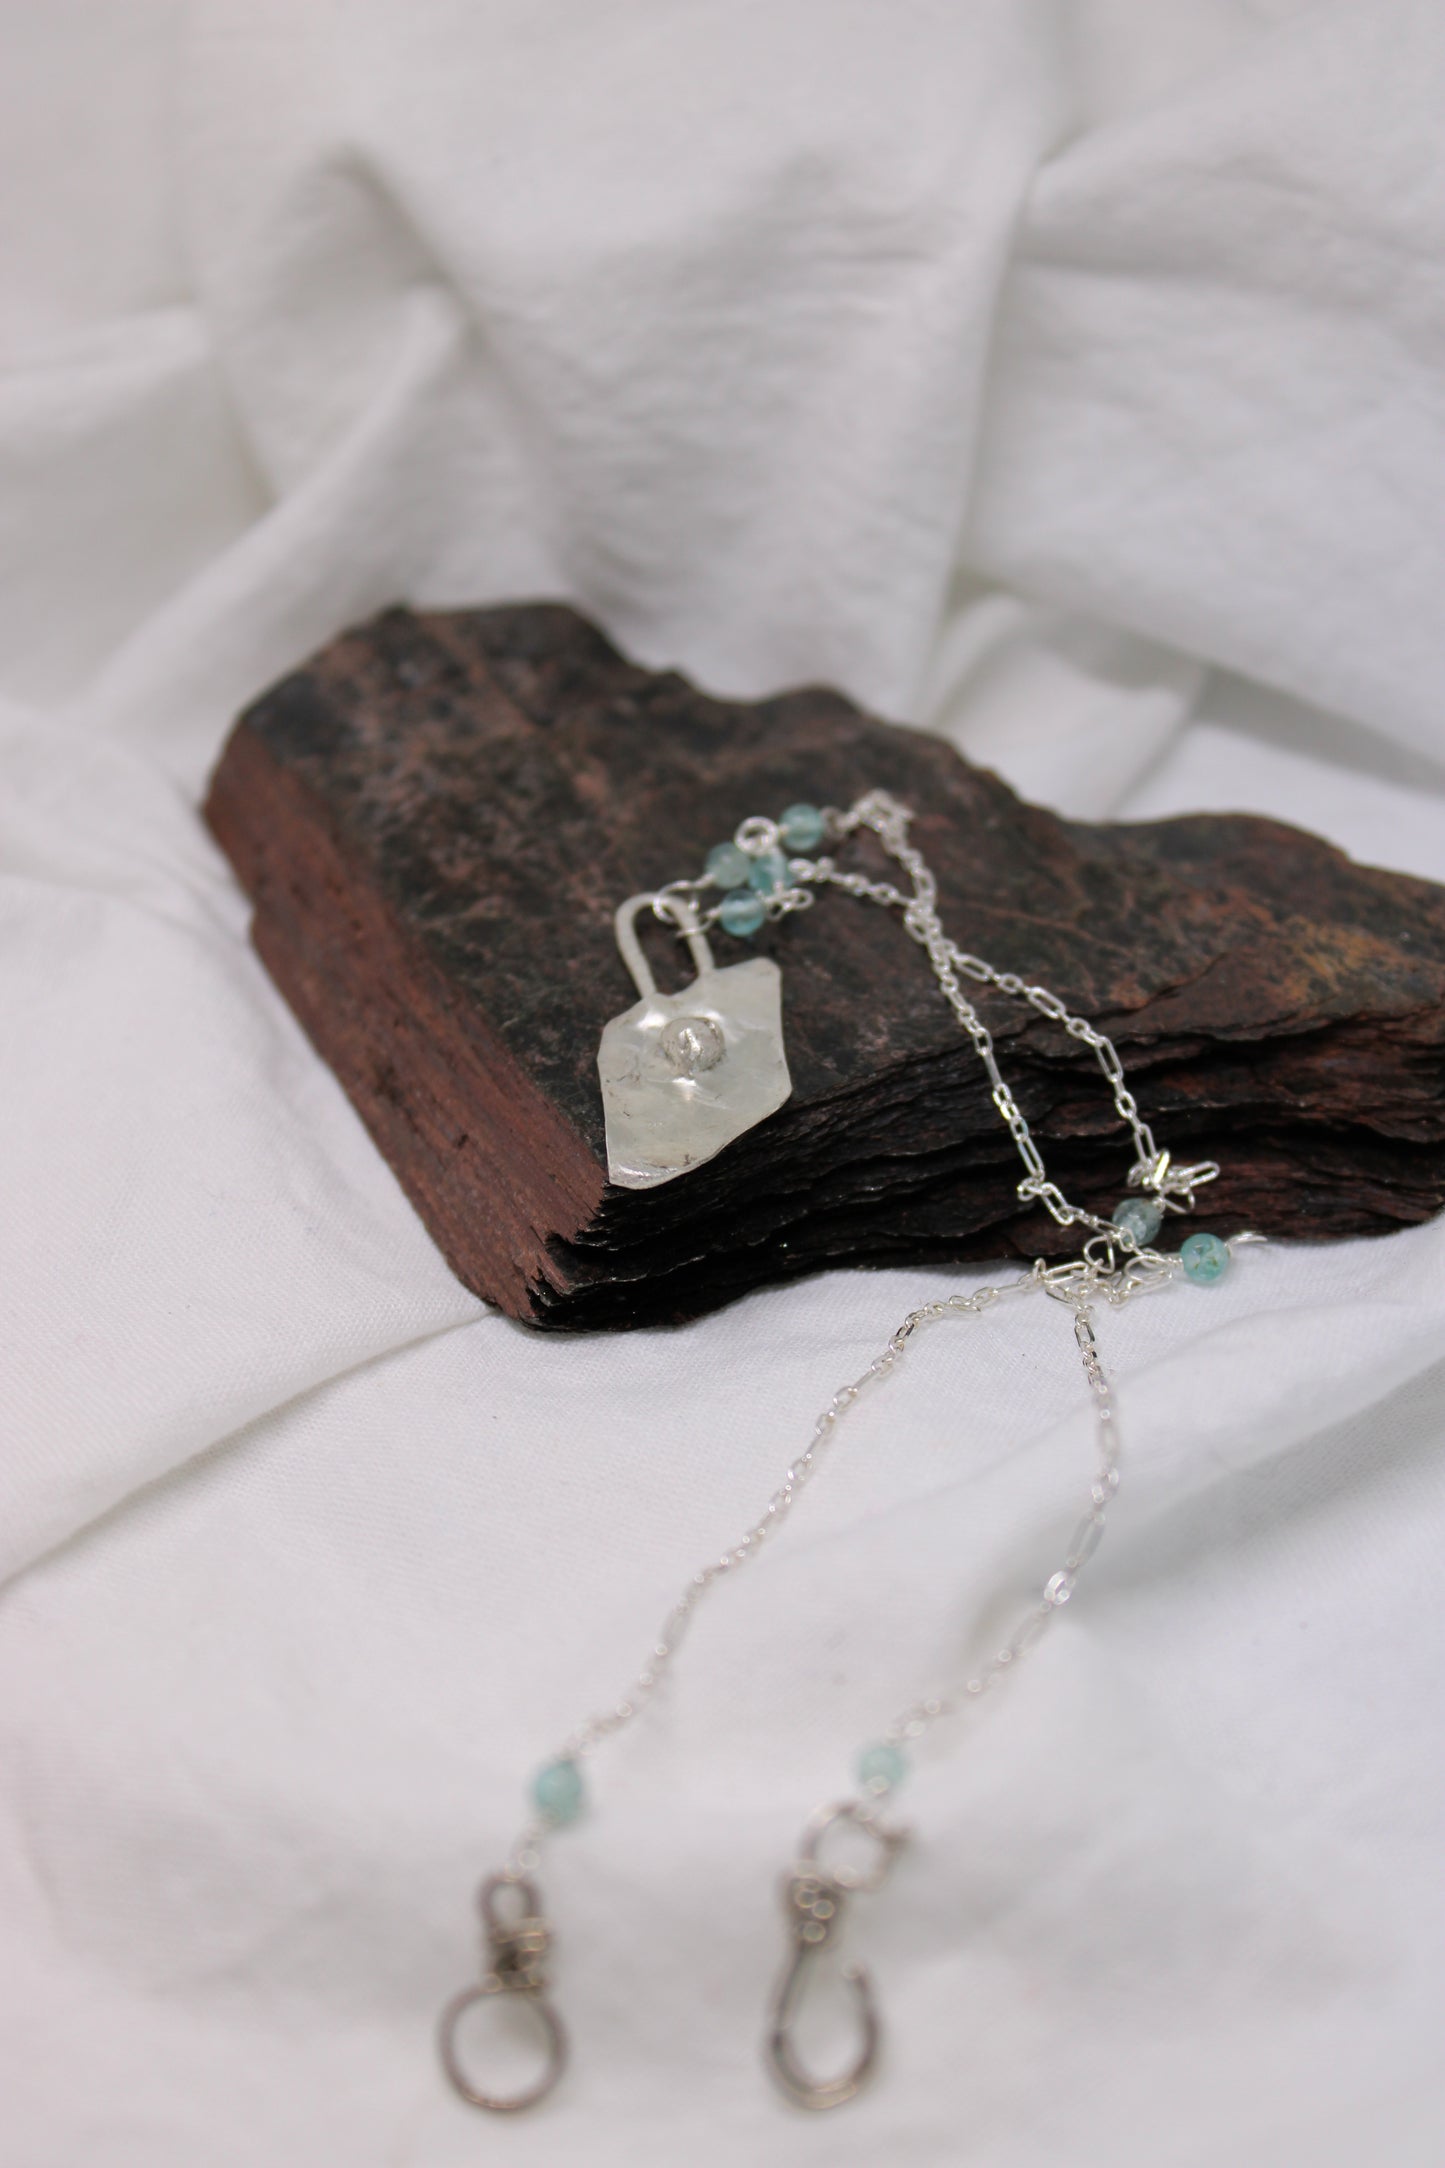 Apatite Bead Sterling Silver Chain Necklace Handmade Geometric Abstract design